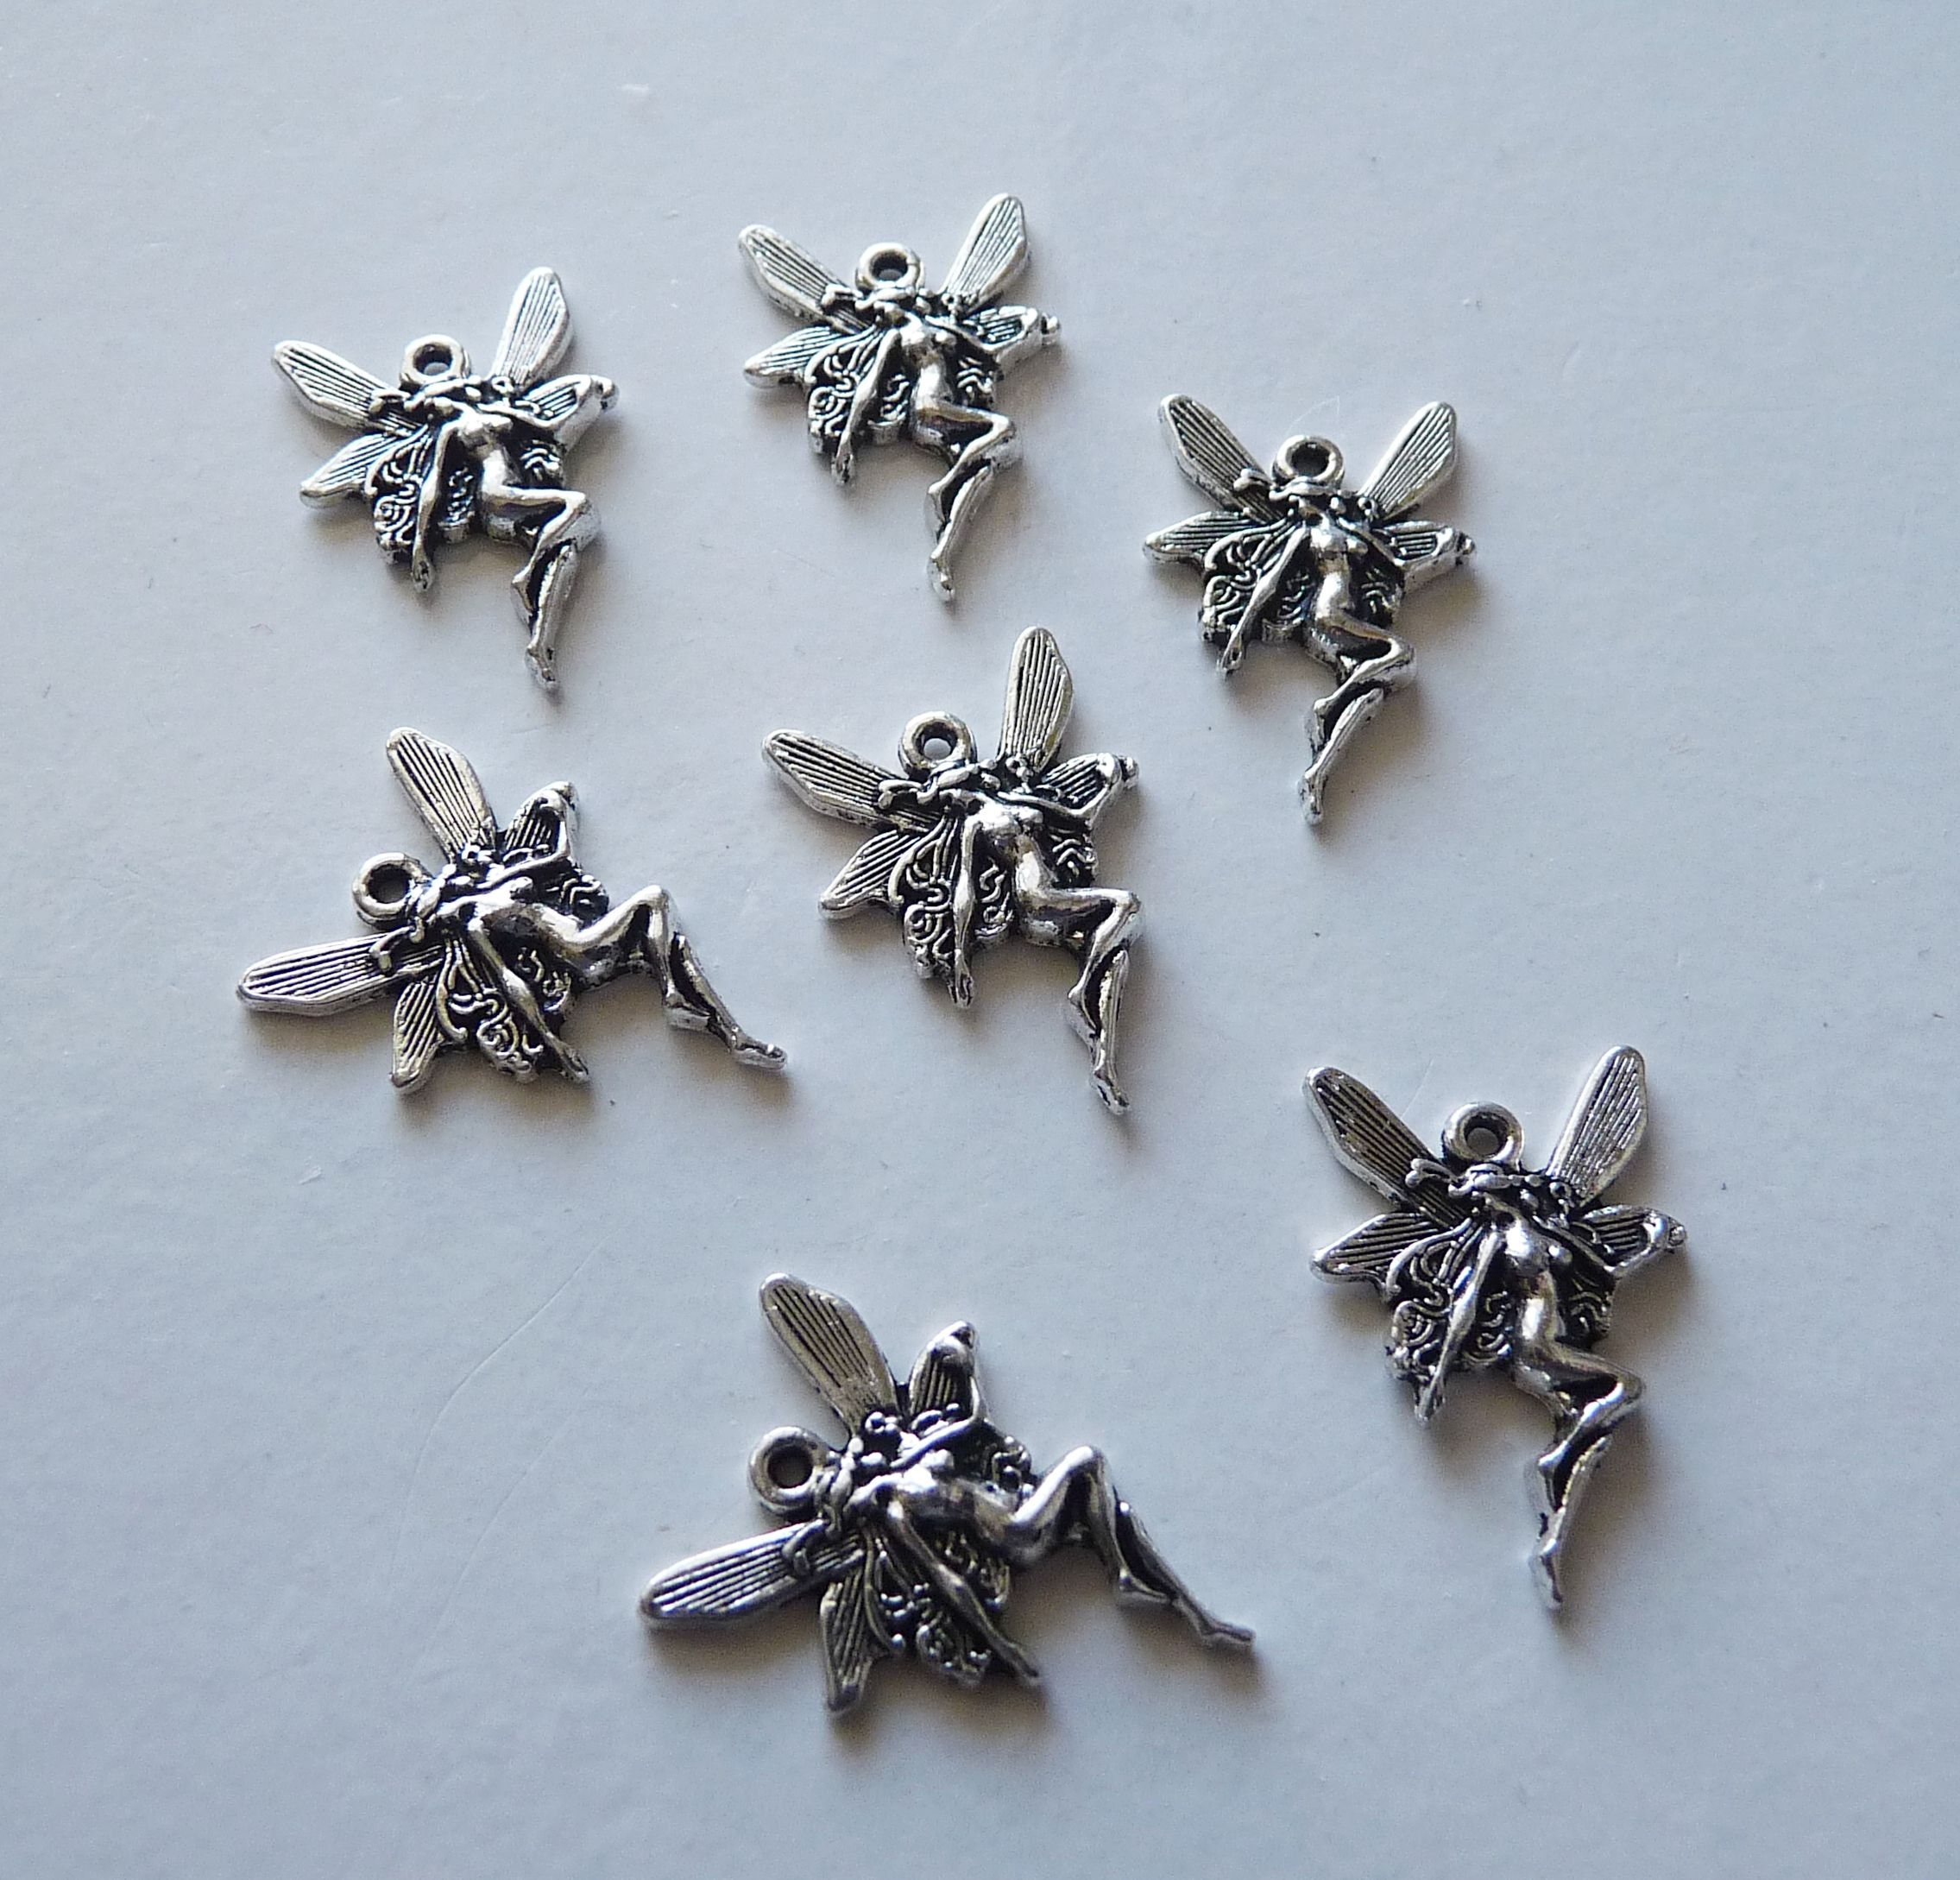 39pcs Antique Silver Angel Fairy Charms Pendants Alloy Angel Charm Craft Supplies for Jewelry DIY Bracelet Necklace Craft Making Finding,13 Styles